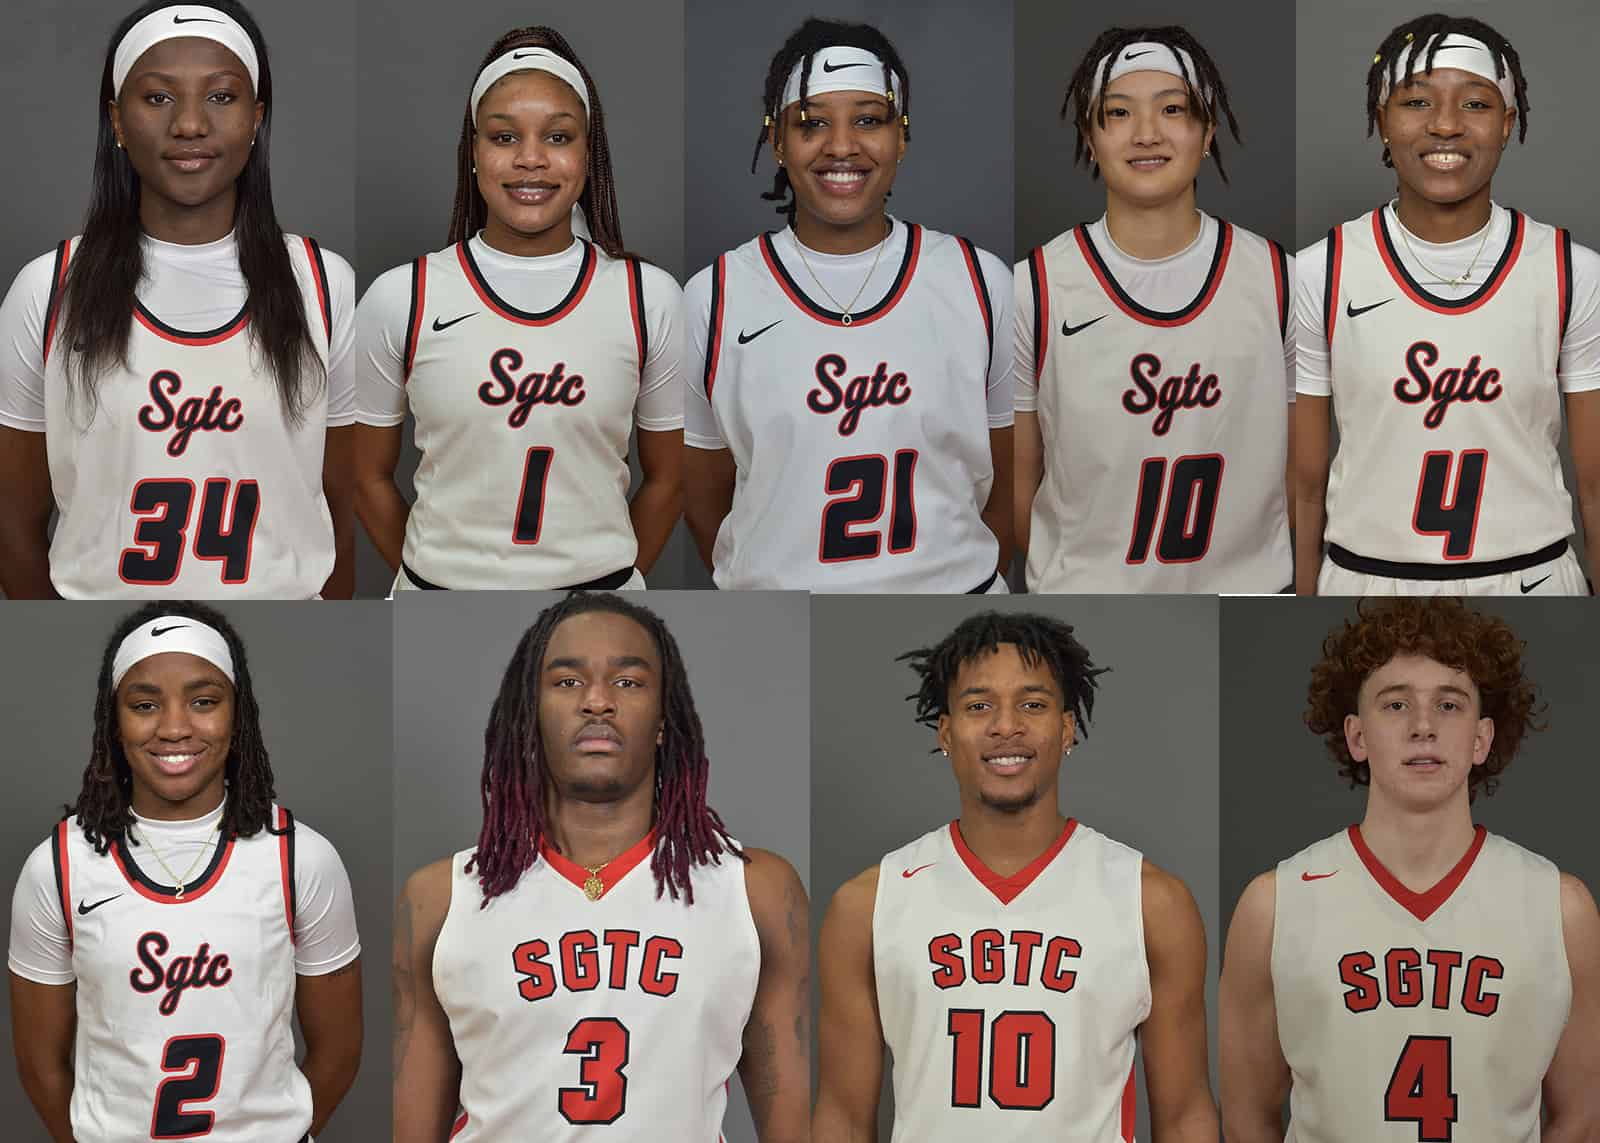 Nine South Georgia Technical College basketball players are currently ranked nationally for their individual efforts. They include Lady Jets: Femme Sikuzani (34), Imani McNeal (1), Hope Butera (21), Moe Shida (10), Veronica Charles (4), and Maikya Simmons (2). The Jets earning national recognition include: Jalen Reynolds (3), Marvin McGhee (10), and Will Johnston (4).